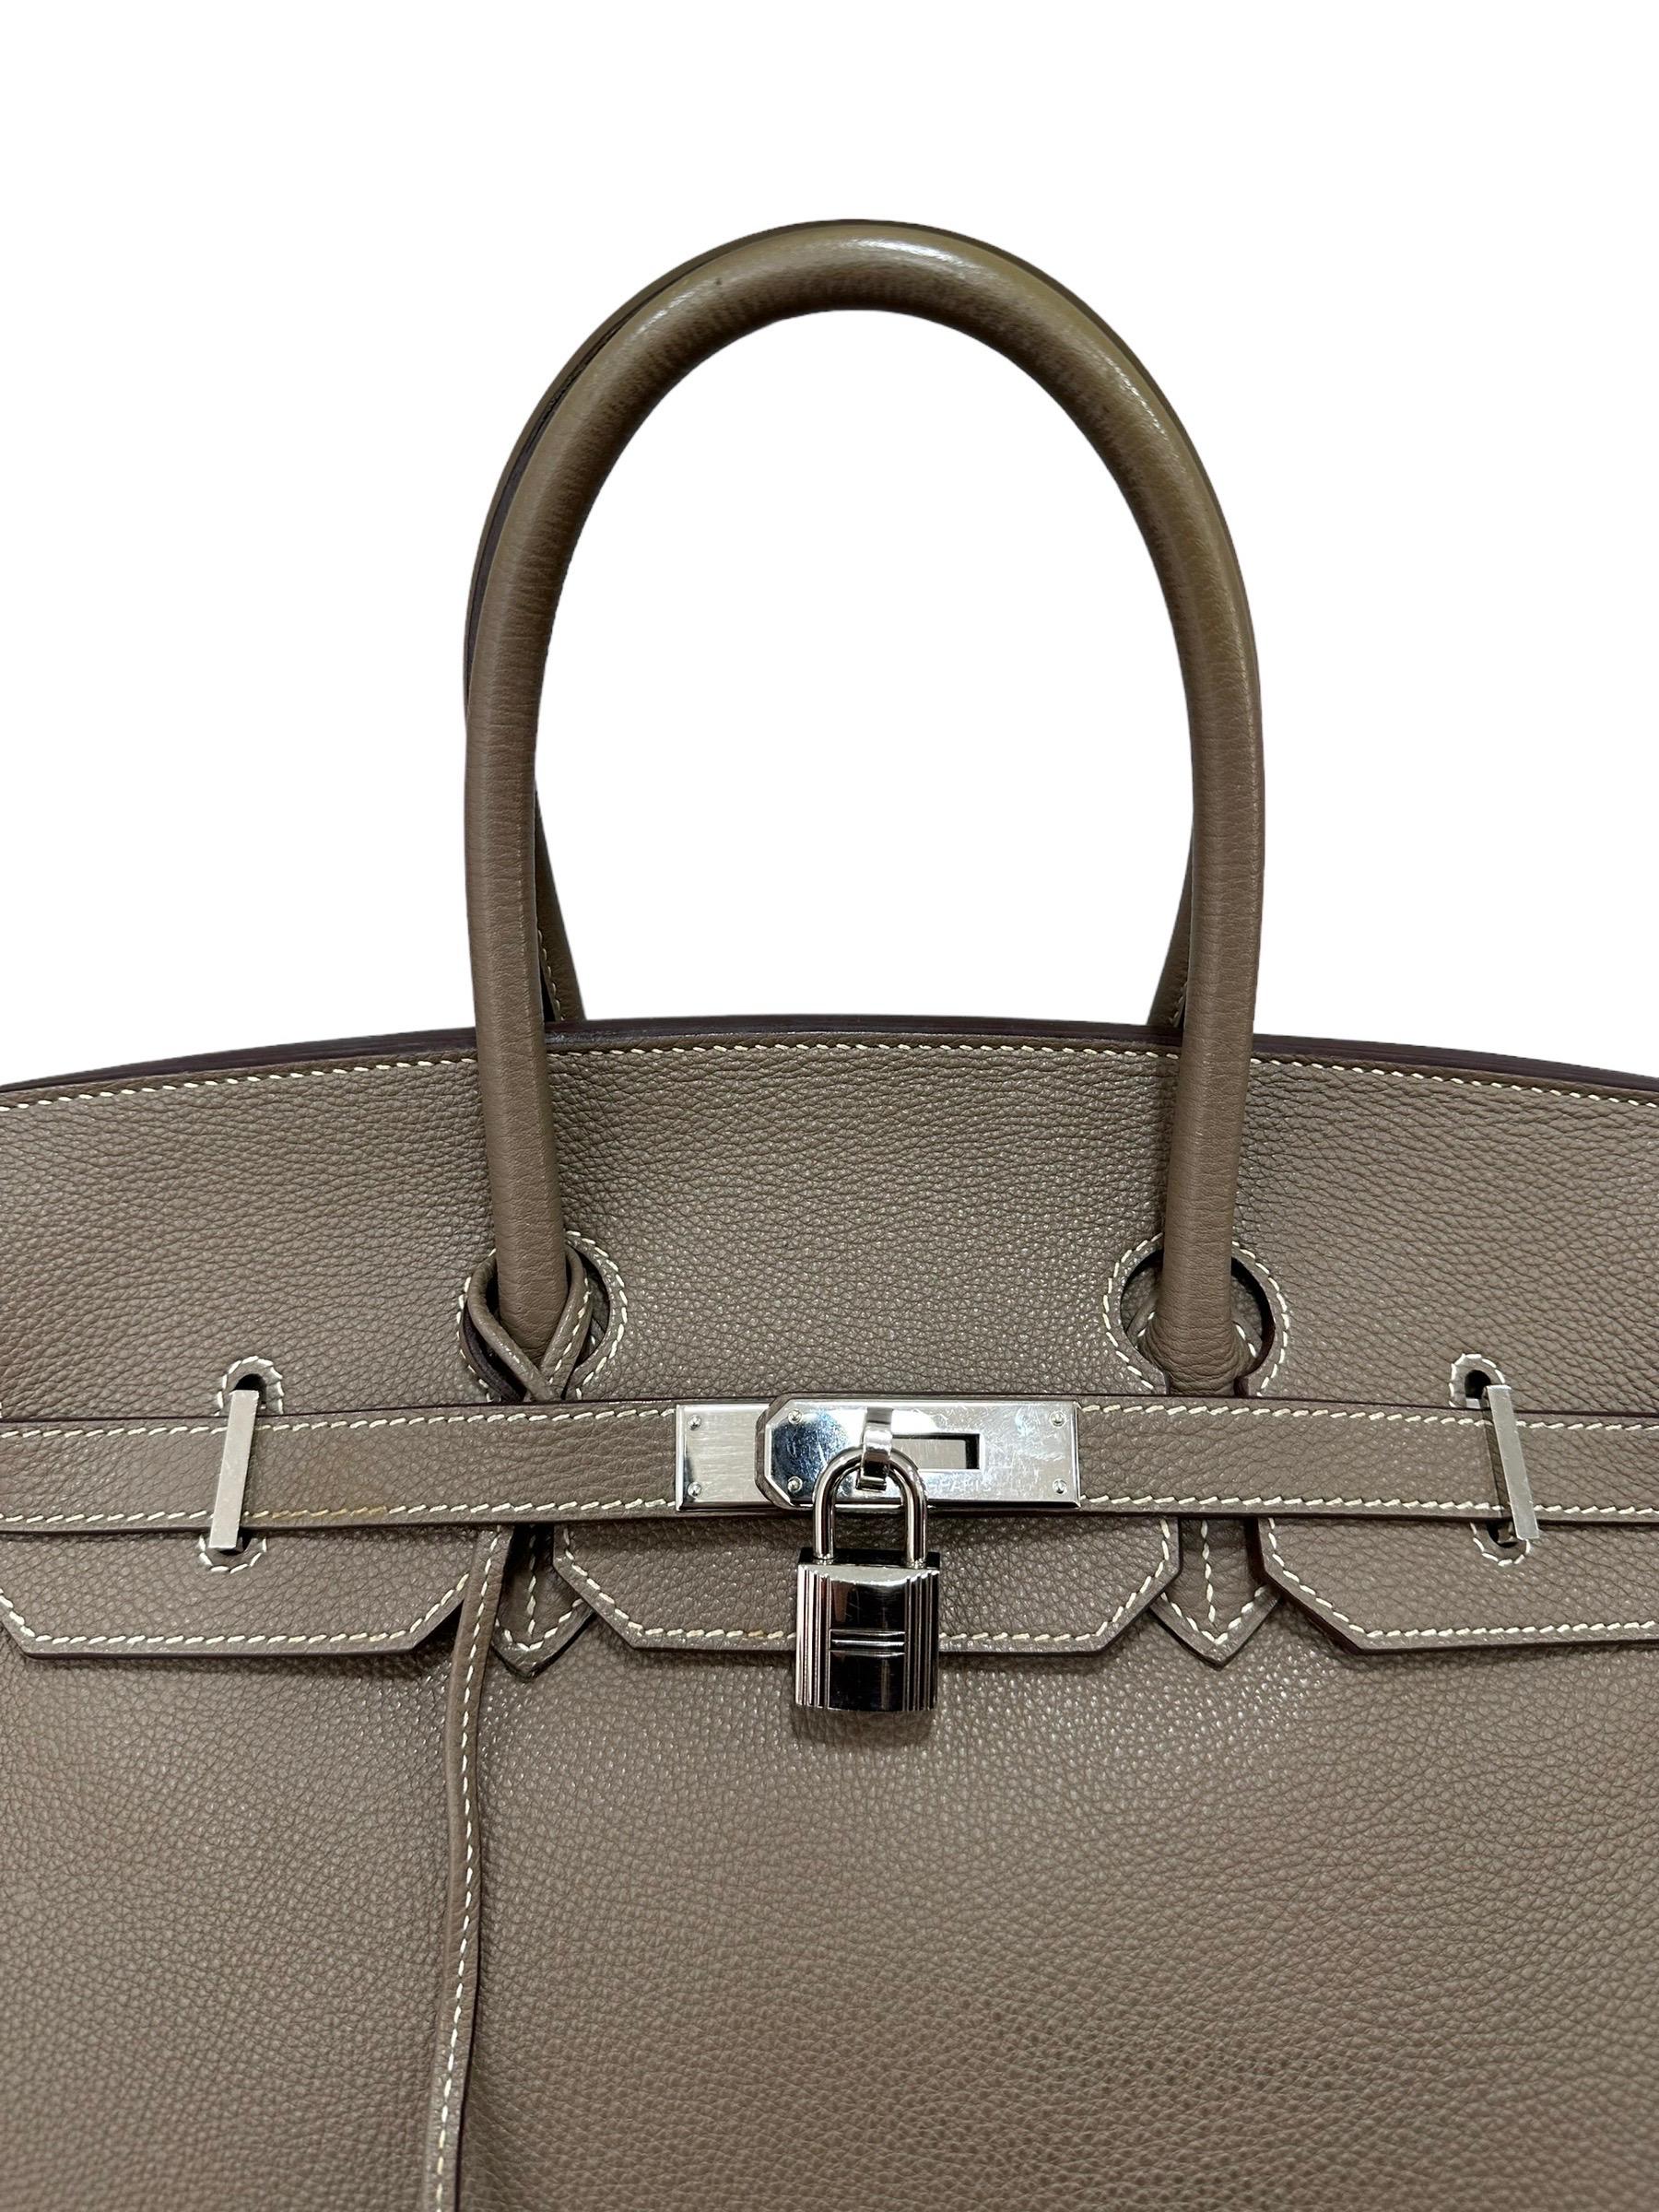 Hermès handbag, Birkin model, size 35, made in toundra-colored togo leather with silver hardware. Equipped with the classic flap with interlocking closure and buckle. Complete with padlock with clochette and keys. Internally lined in leather, very